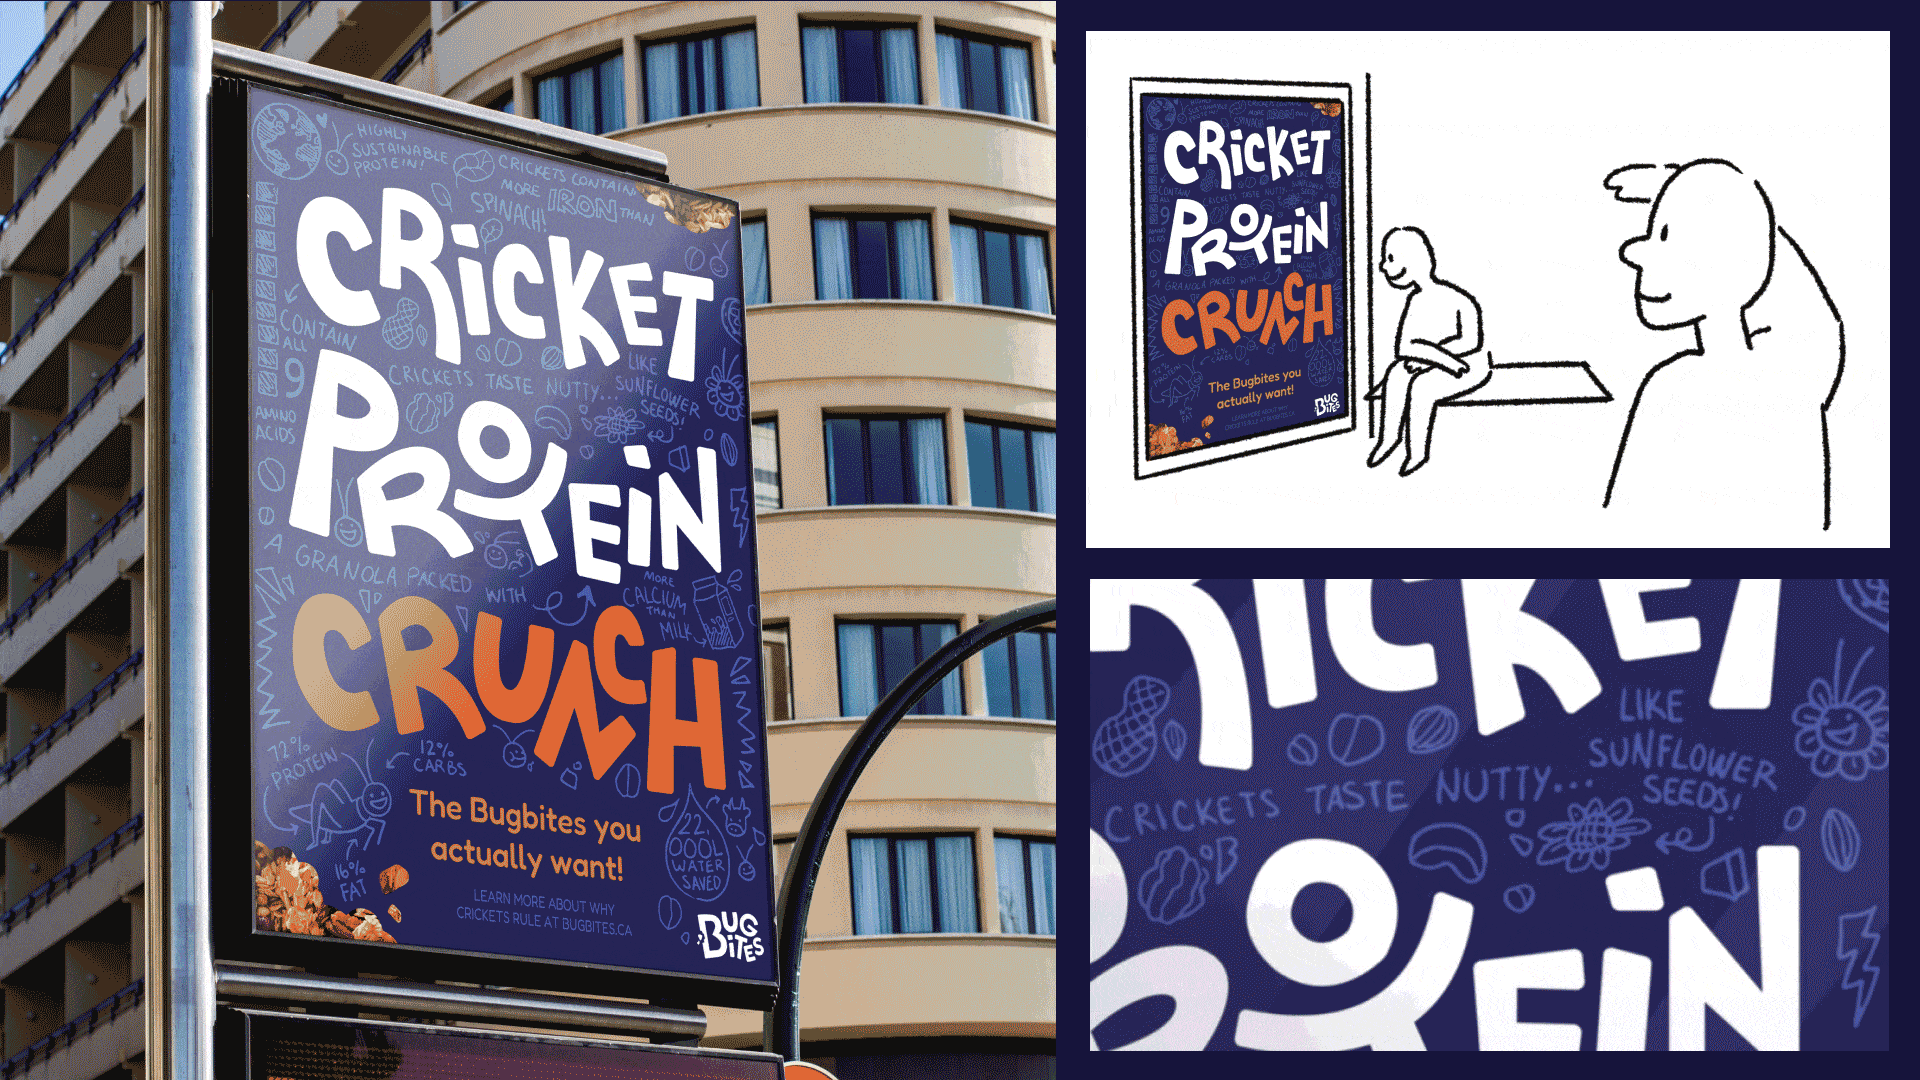 Collage of the brand’s logo, floor sticker ad, and poster mockup.